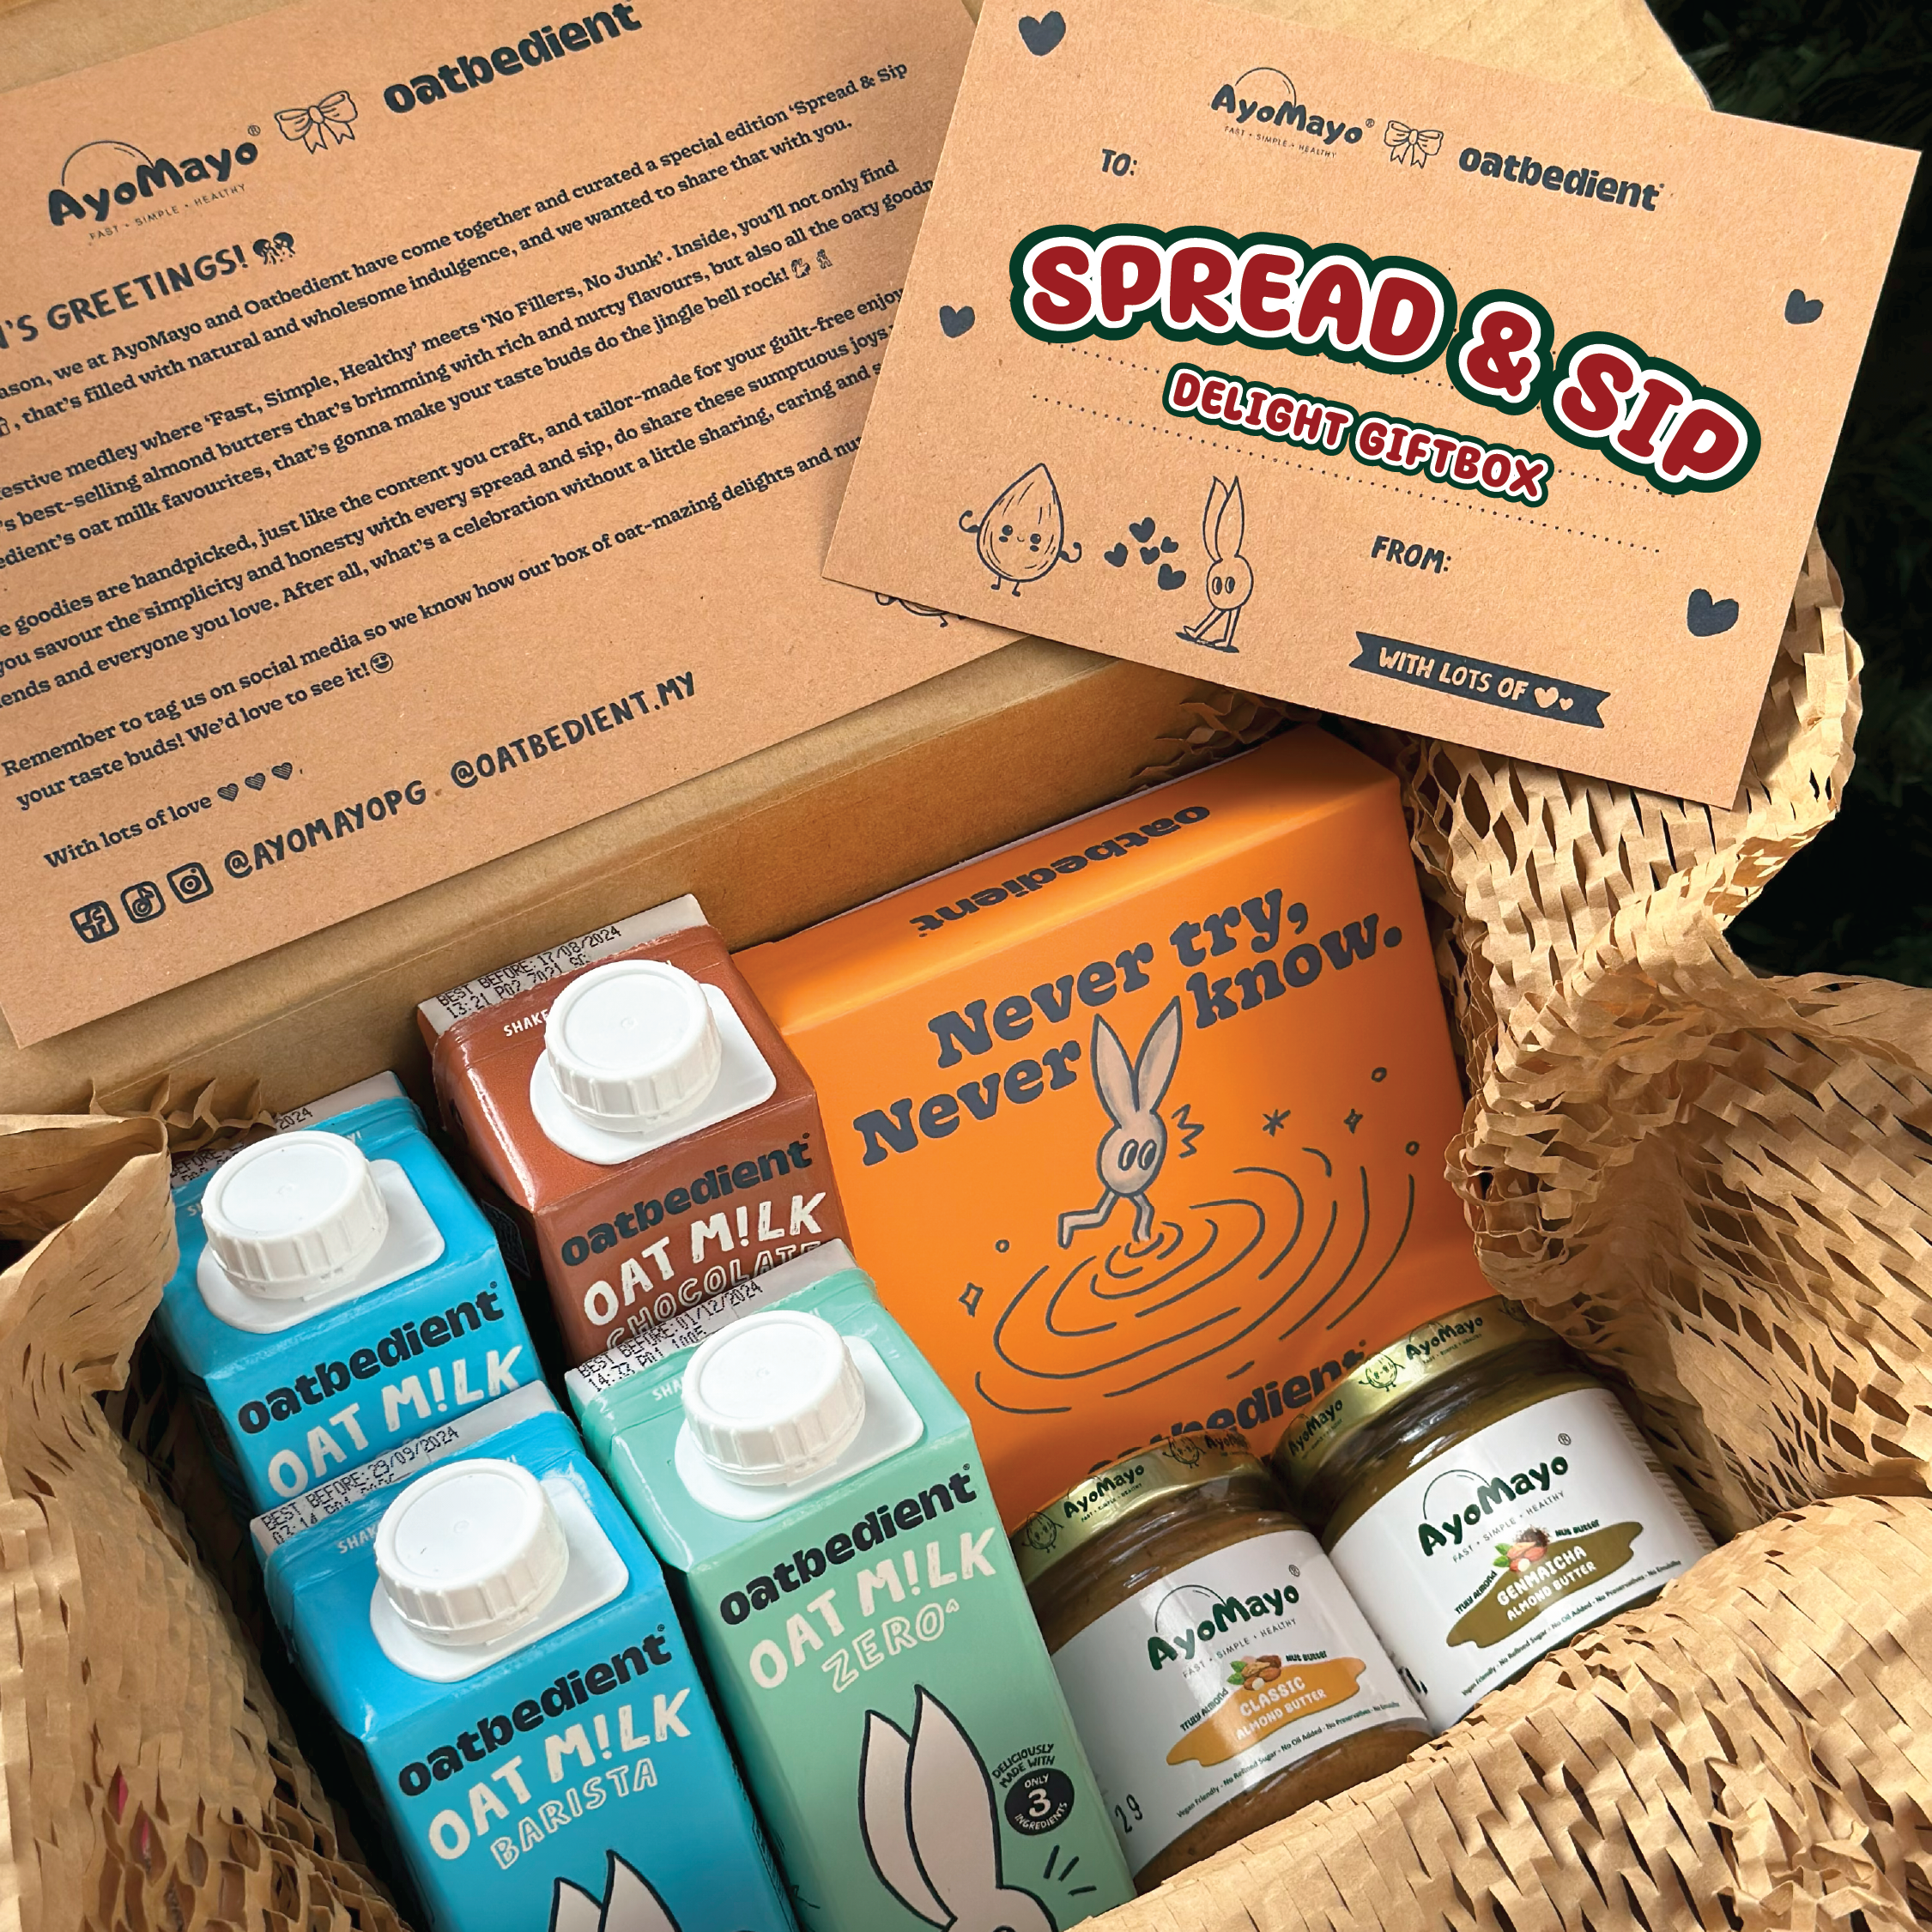 AyoMayo x Oatbedient: SPREAD & SIP Delight Box